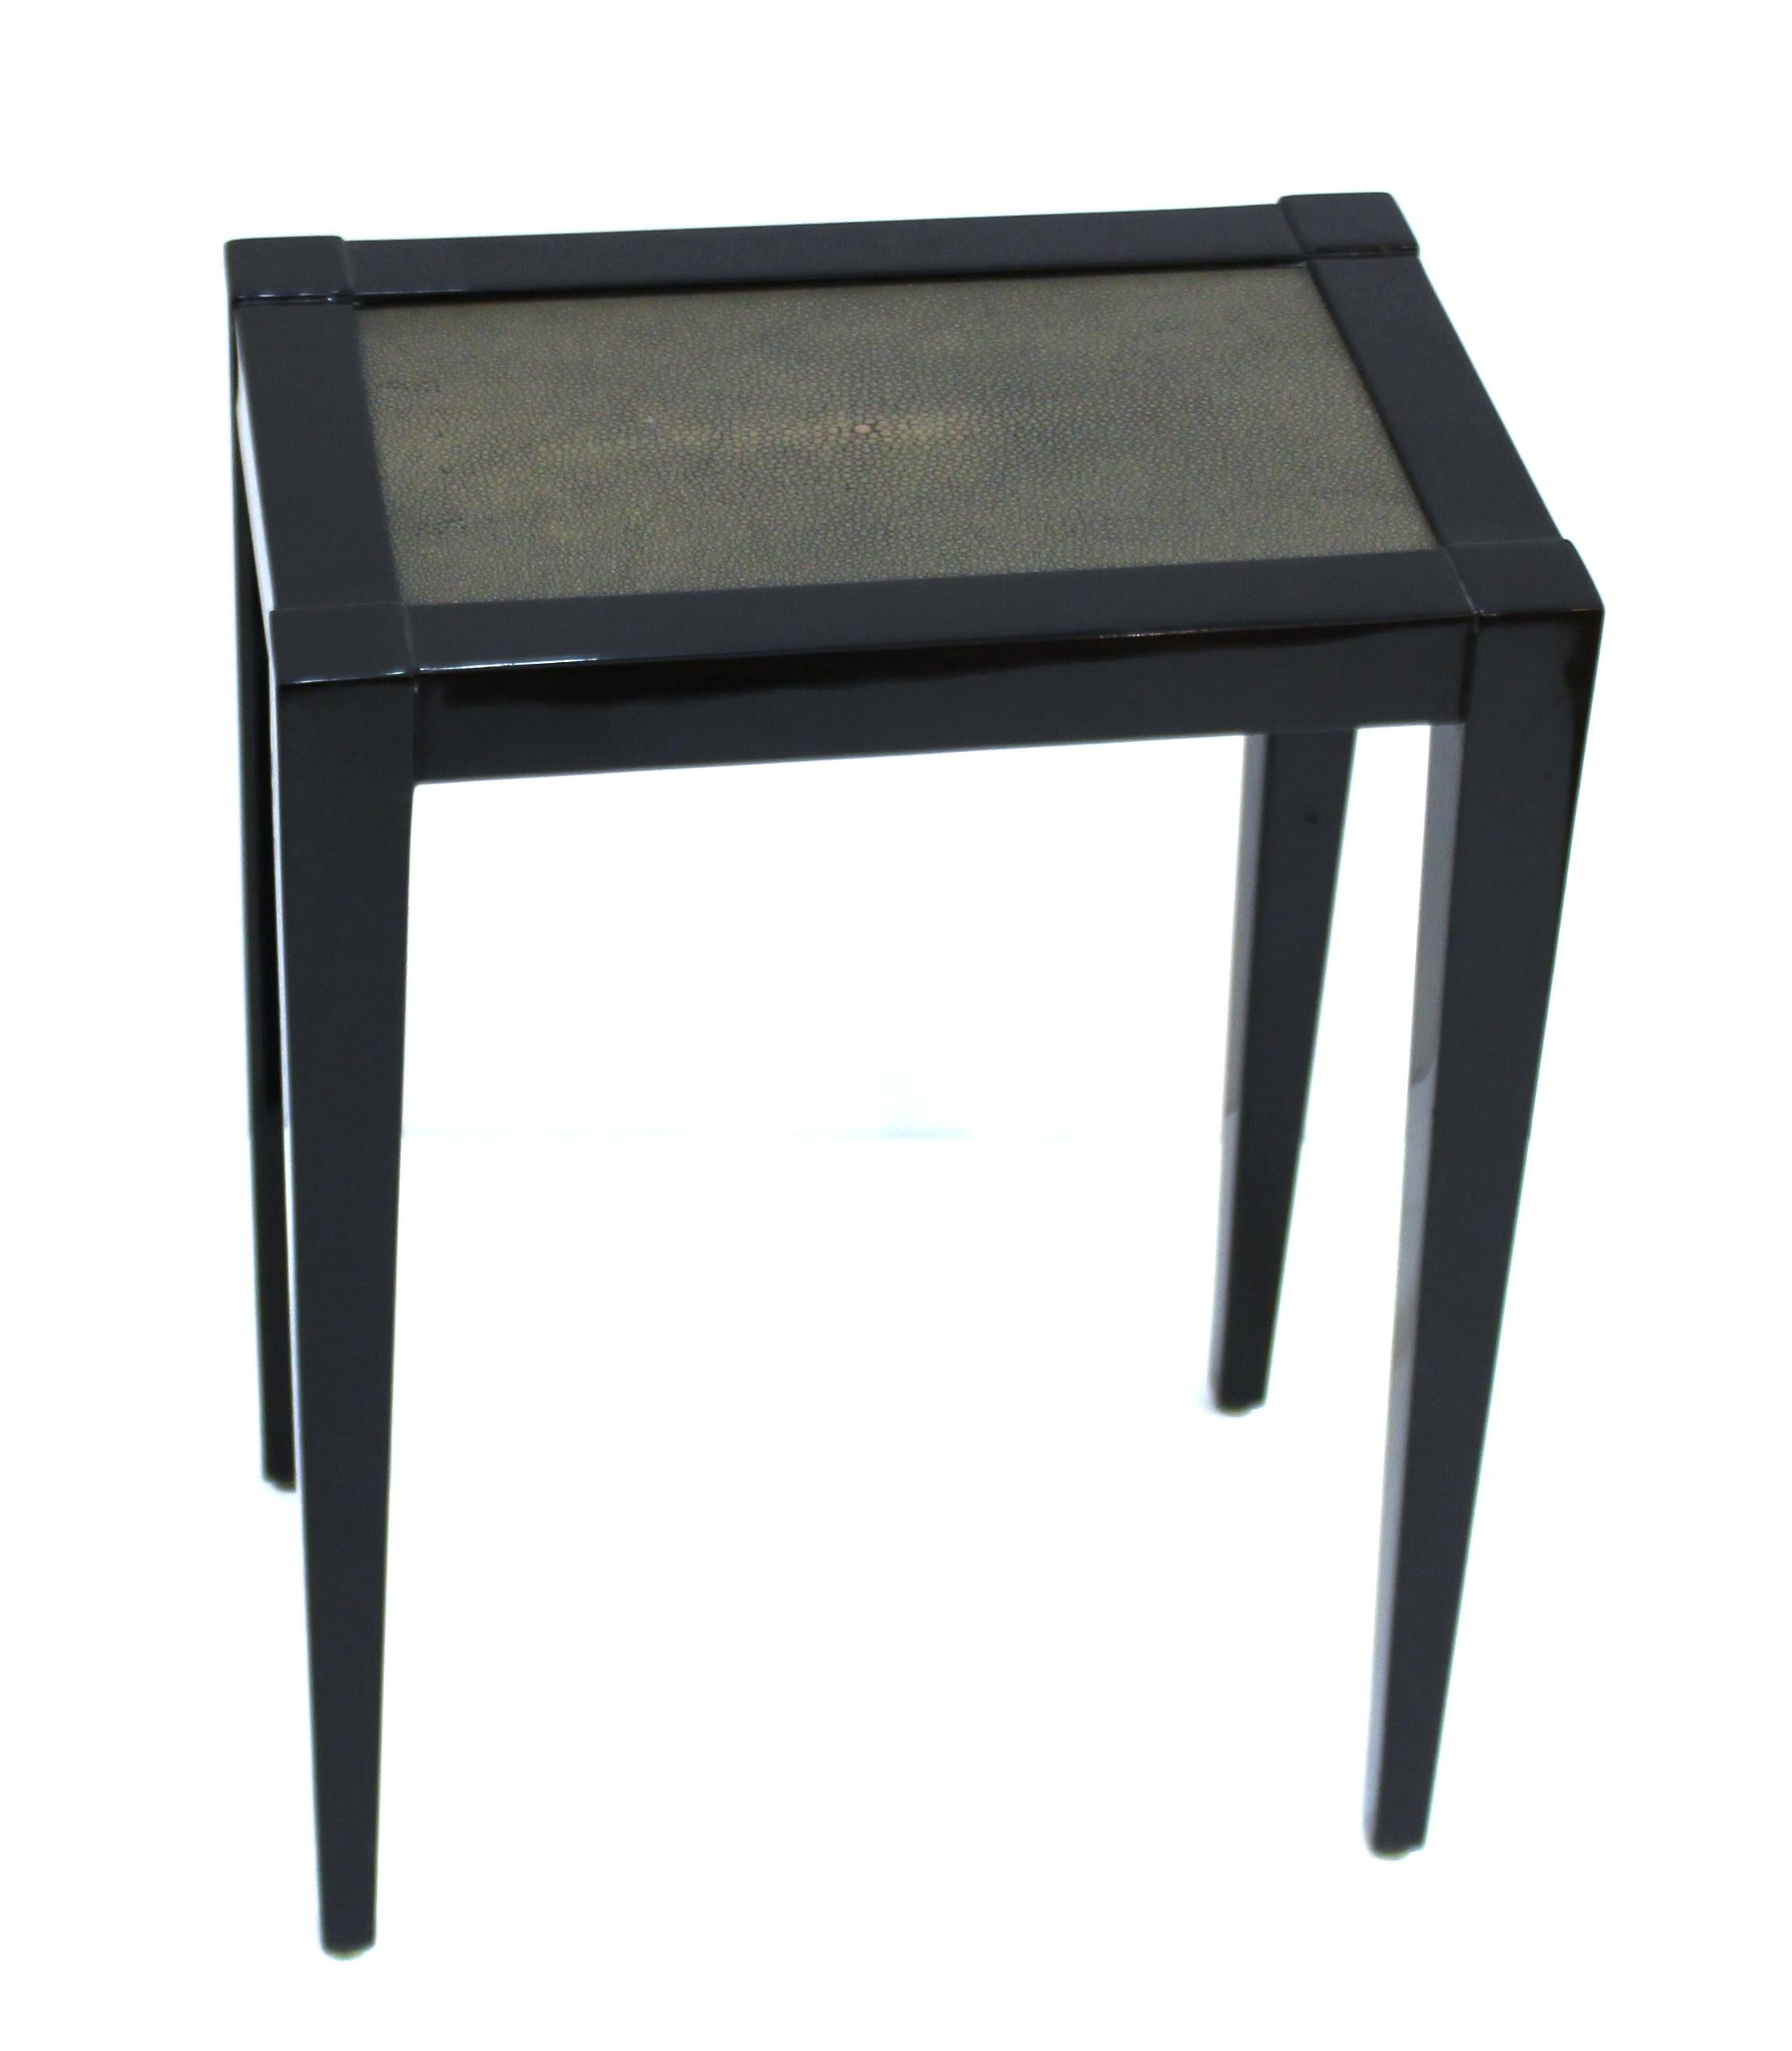 Lacquered Sally Sirkin Lewis for J. Robert Scott Art Deco Revival 'Linea' Side Table